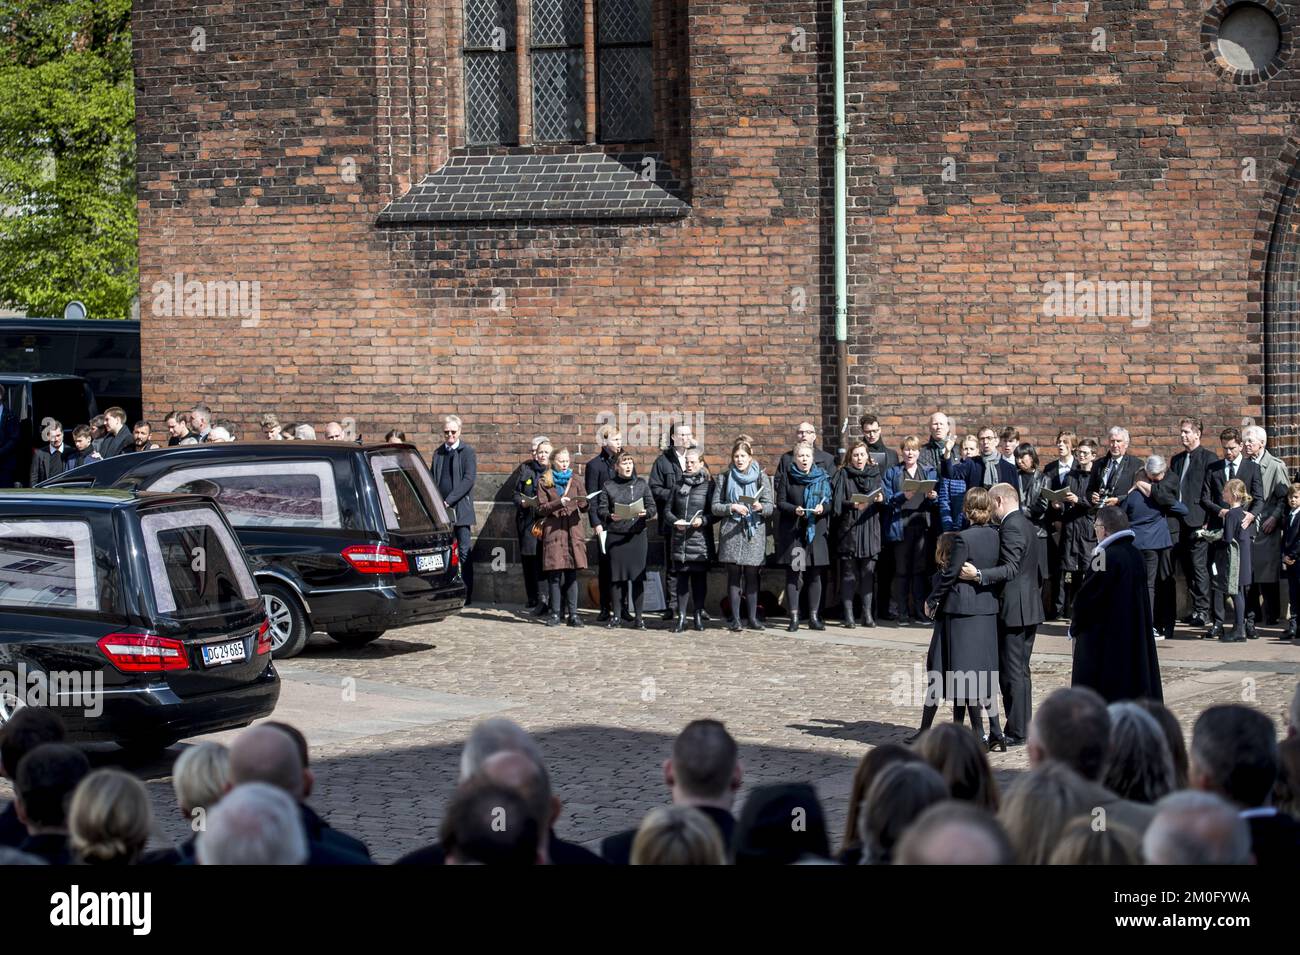 On May 4th 2019. Funeral service for the three children of CEO of clothing brand Bestseller, Anders Holch Povlsen and wife Anne, who were victims of the Sri Lanka terror attack on April 21st. The service was held at Aarhus Cathedral. Among the attending were TRH Crown Prince Frederik, Crown Princess Mary, their four children Prince Christian, Princess Isabella, Prince Vincent and Princess Josephine, Prime Minister Lars Løkke Rasmussen, actor Nikolaj Lie Kaas, and several other cultural and political personas. Stock Photo